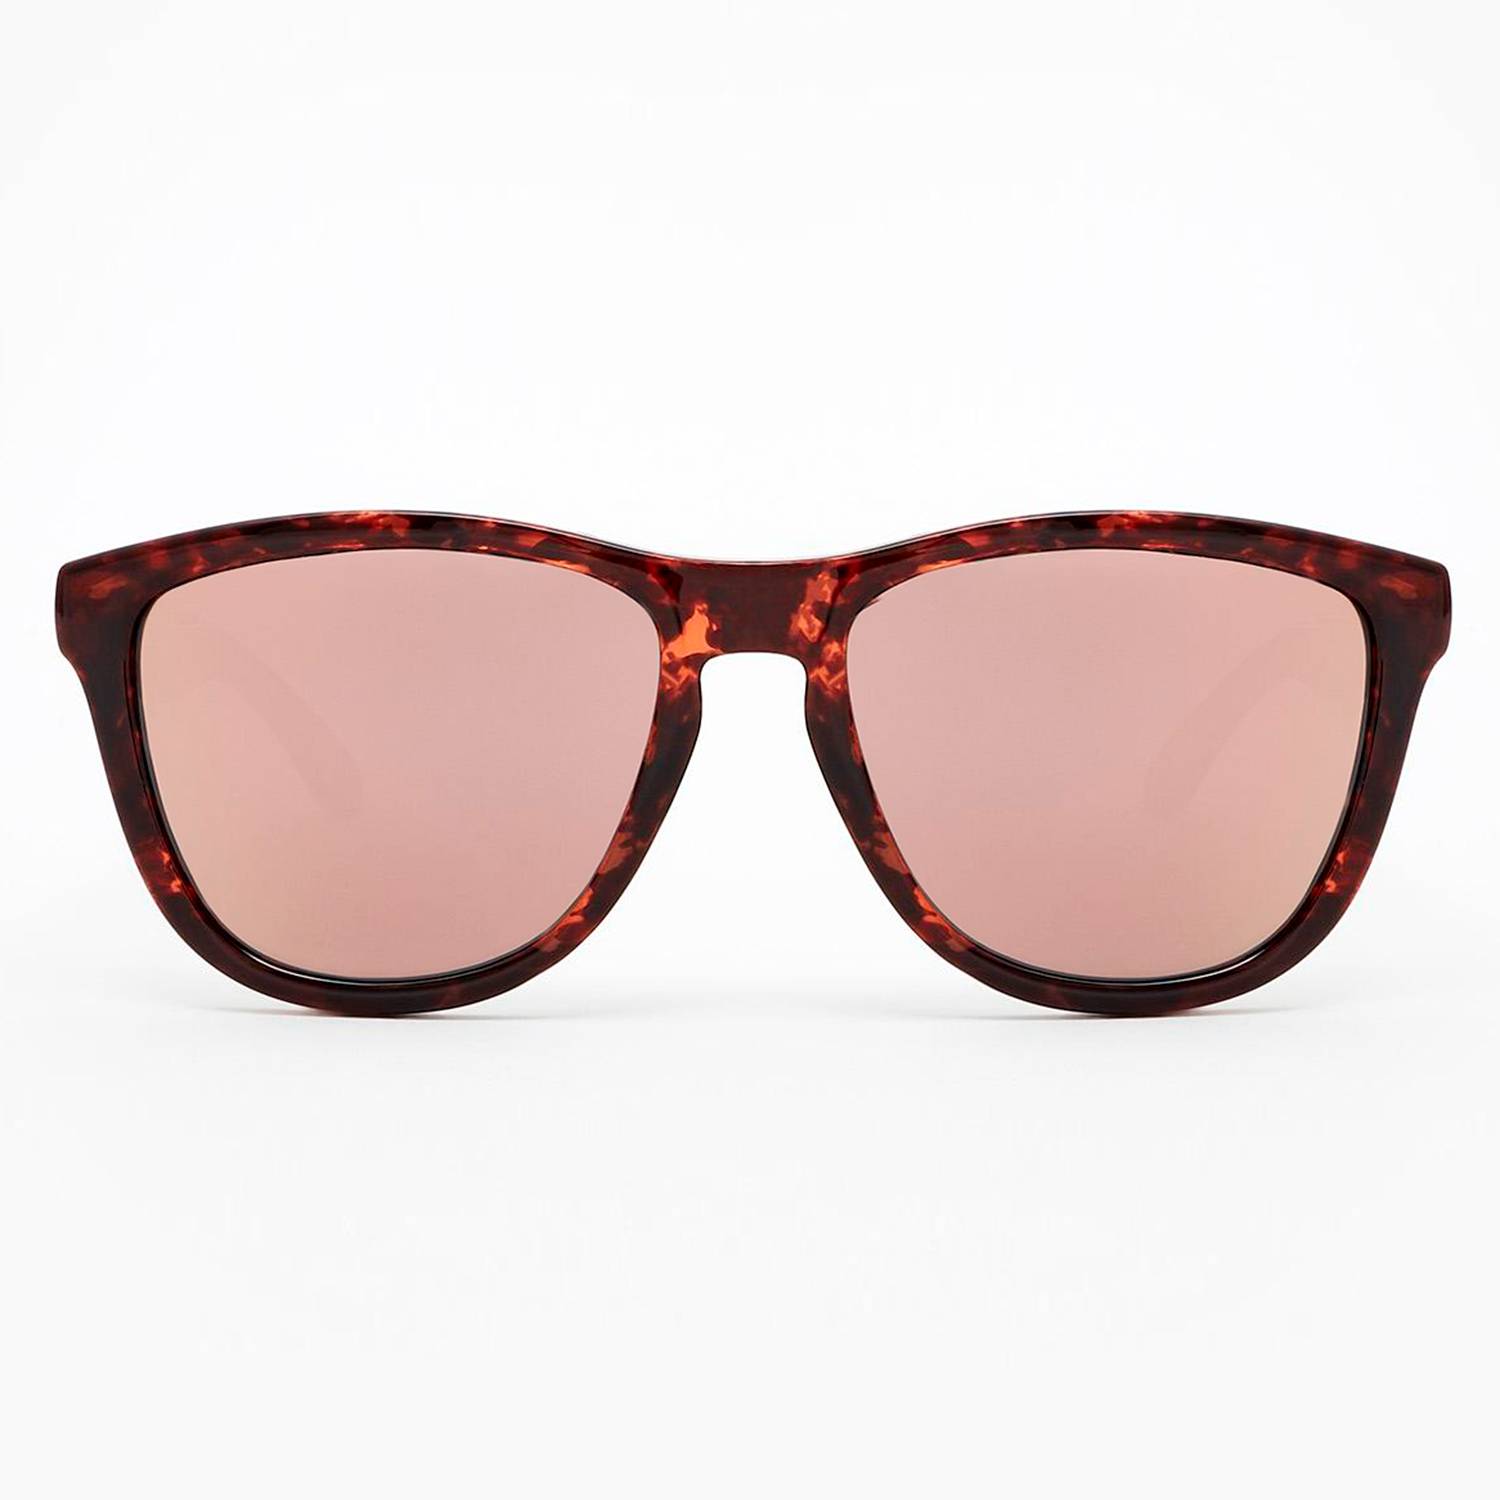 Gafas de sol Mujer Hawkers Rose Gold One HAWKERS